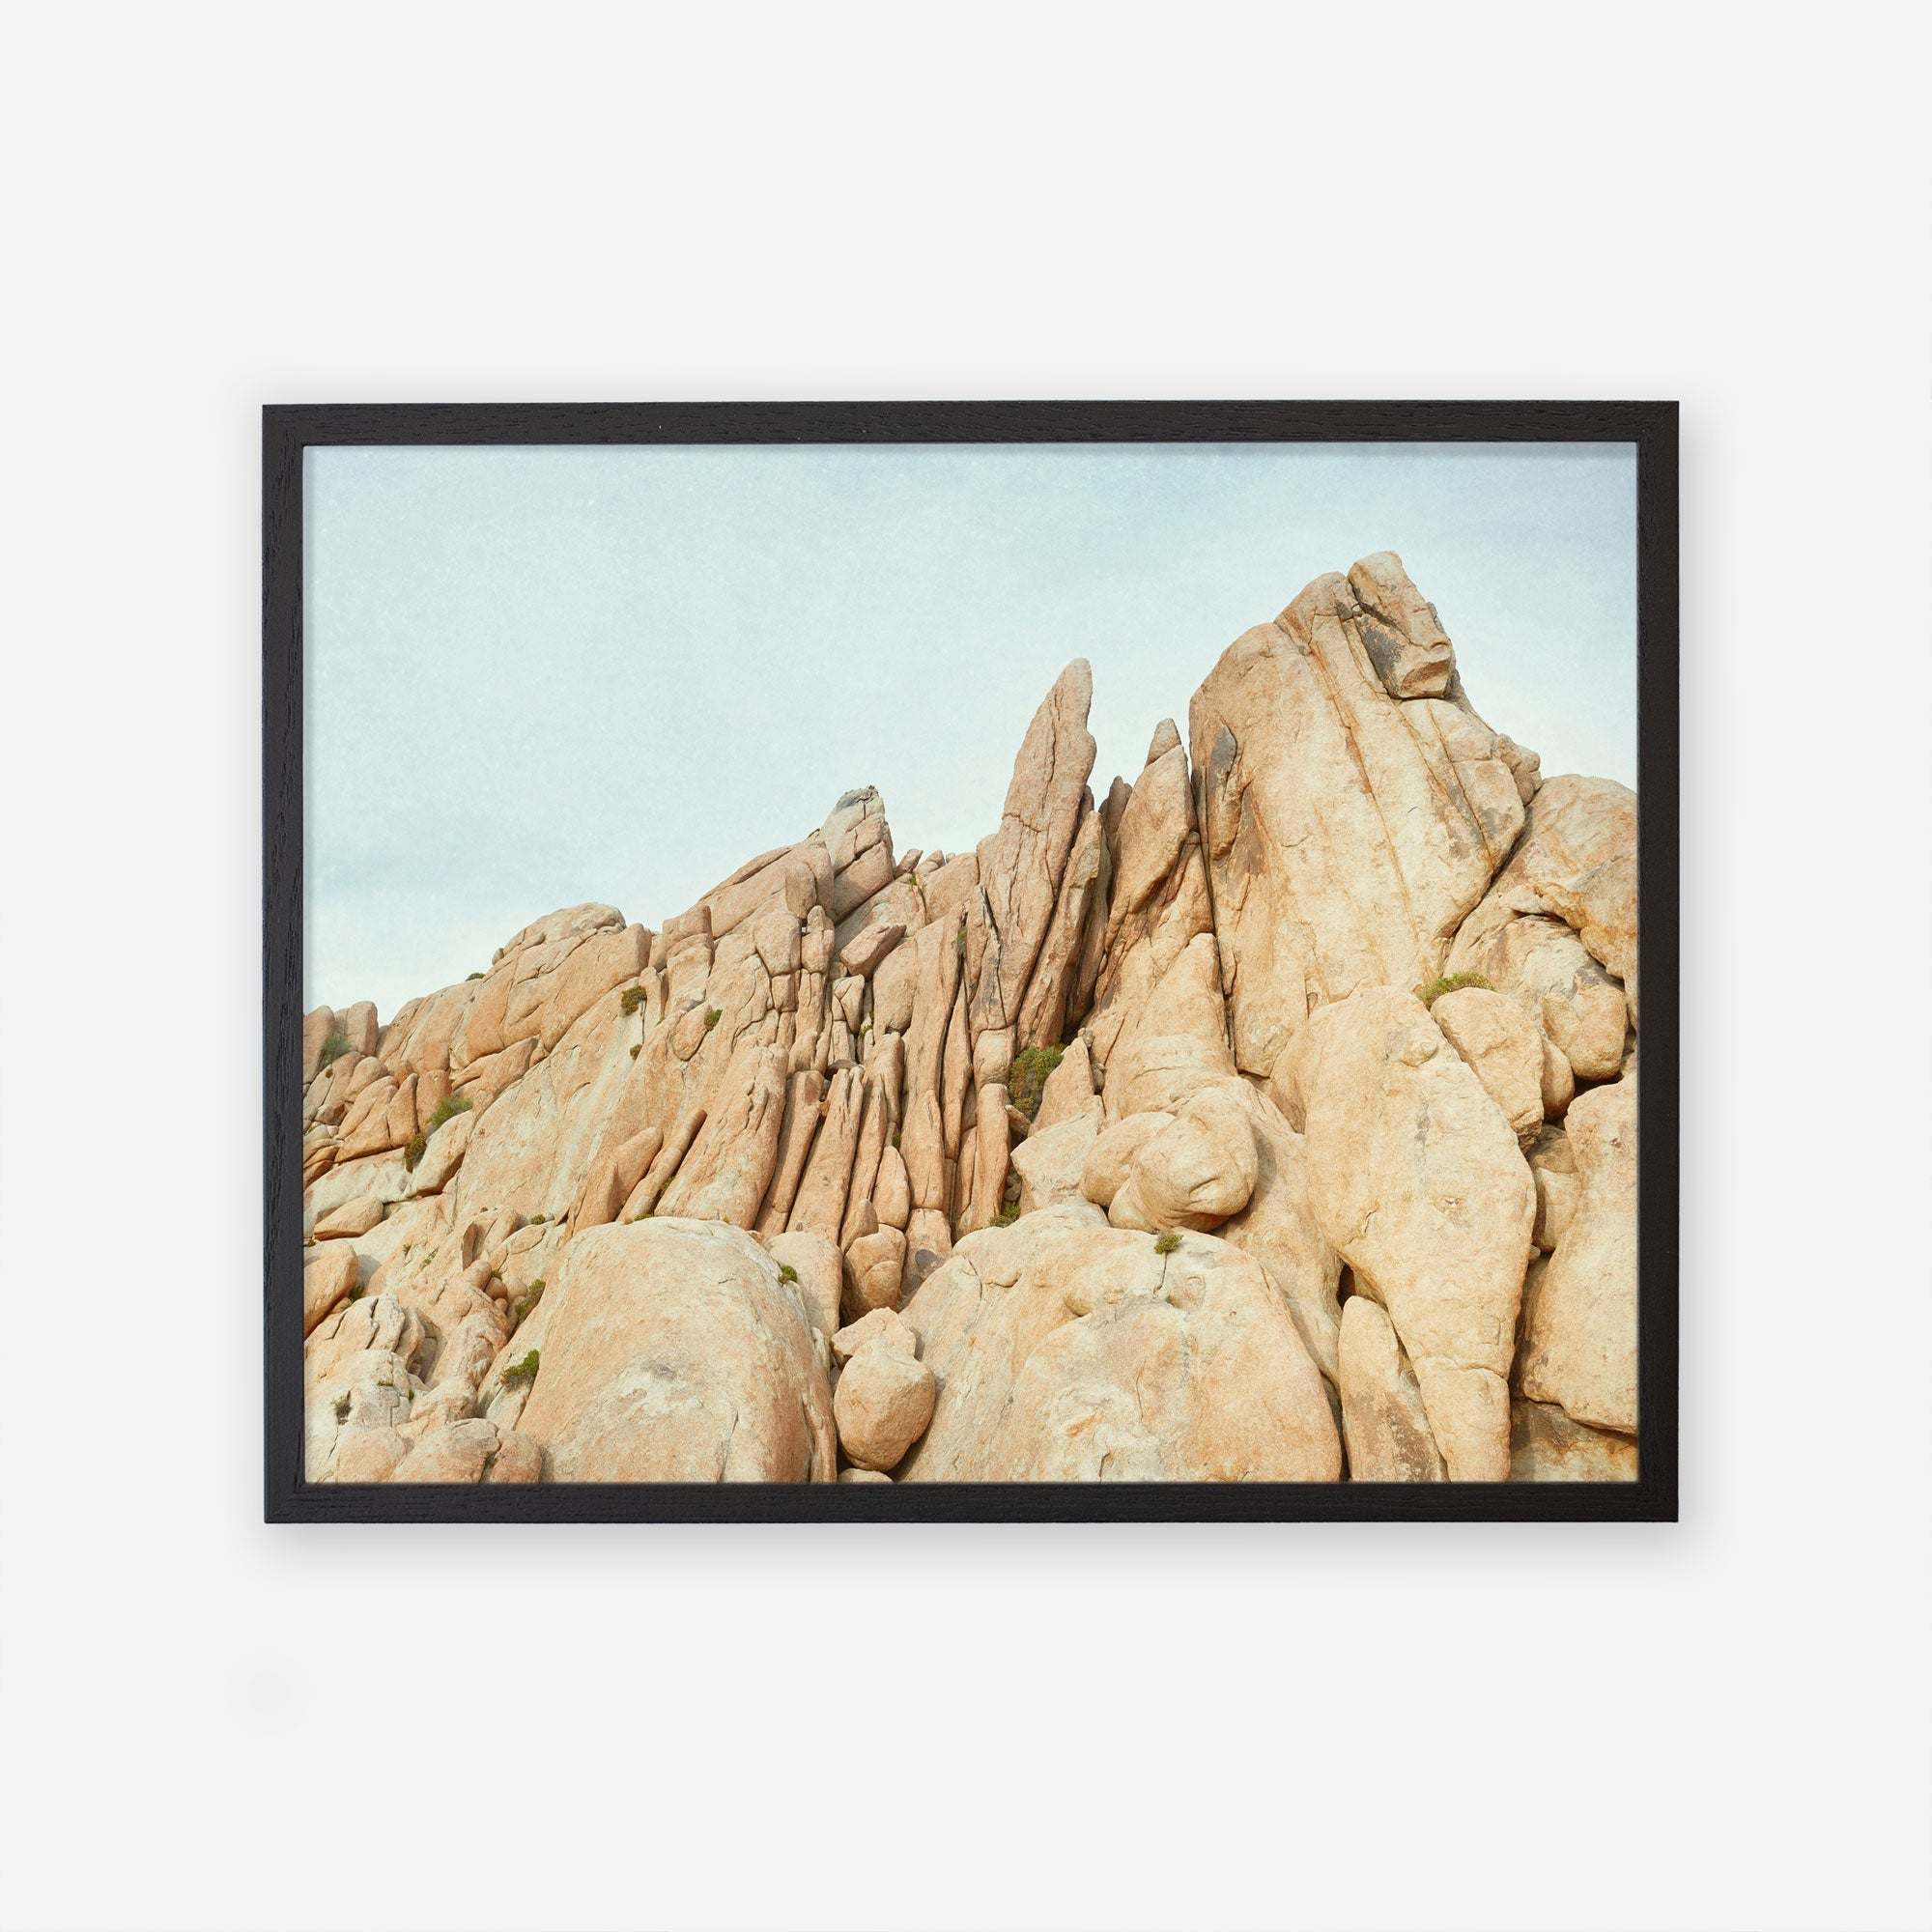 A framed photograph of a rugged, rocky landscape showcasing a cluster of large, weathered boulders under a clear sky in Joshua Tree.
Product Name: Offley Green&#39;s &#39;Joshua Rocks&#39; Print